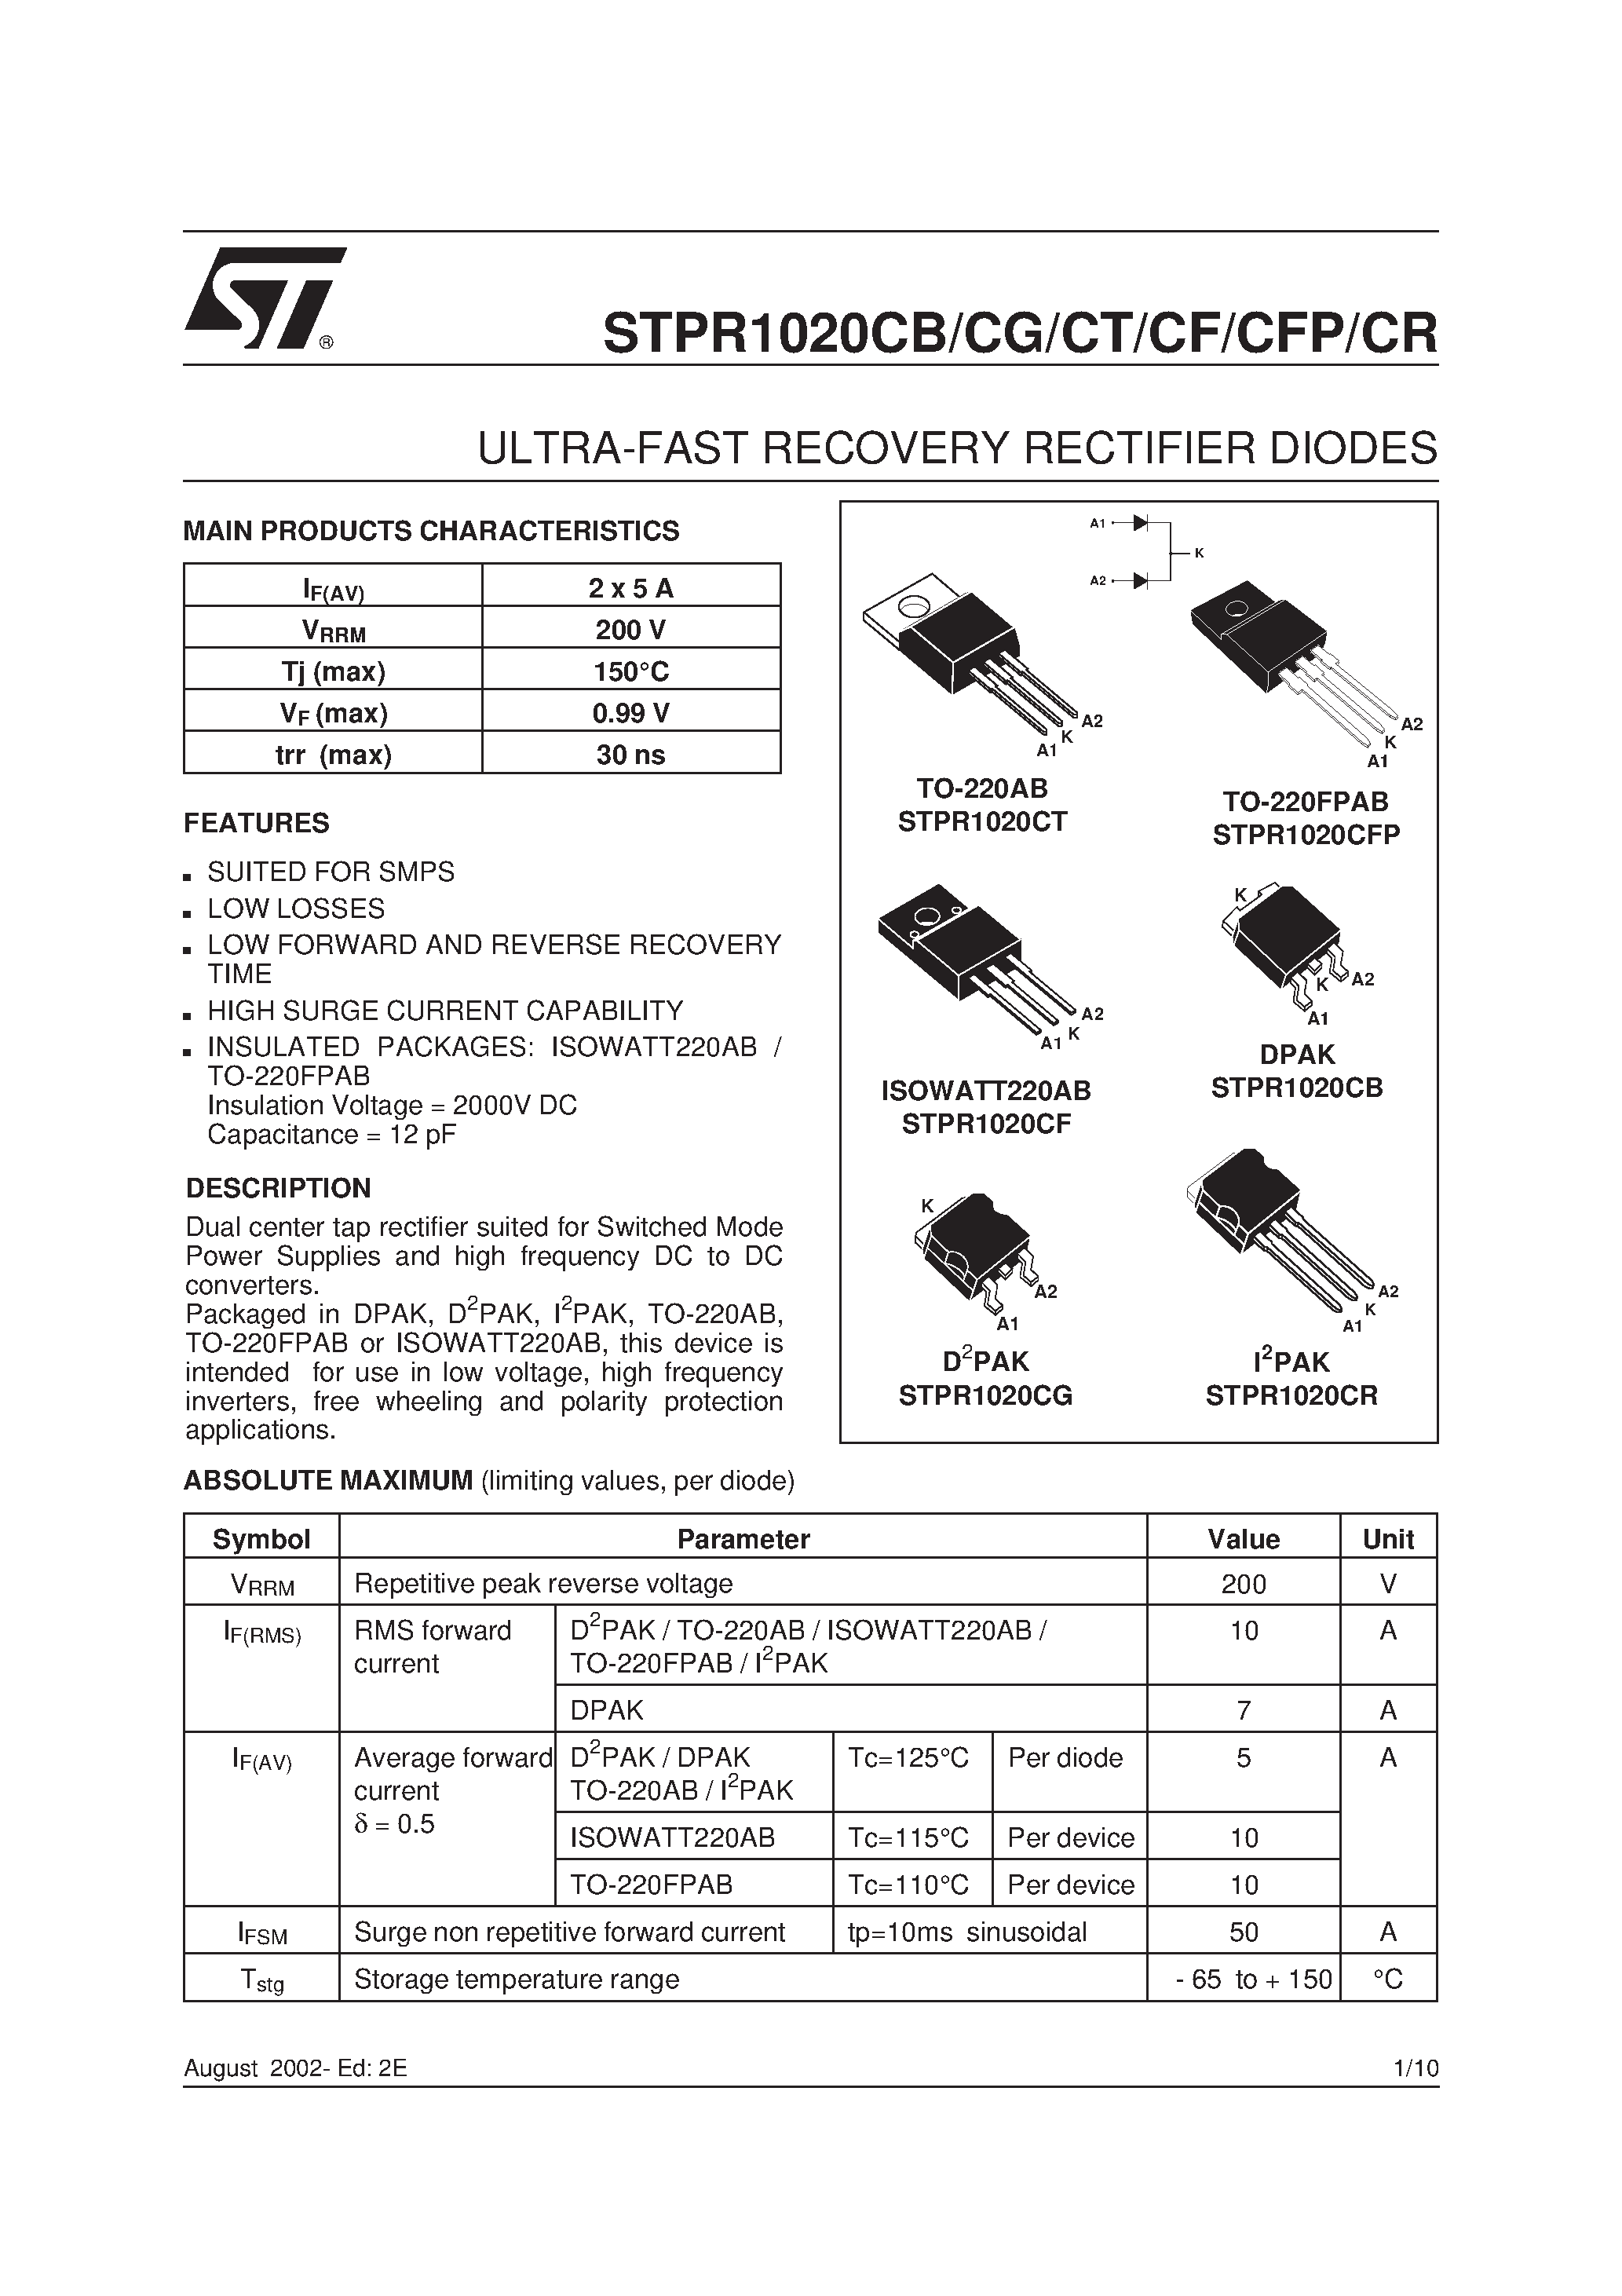 Даташит STPR1020 - ULTRA-FAST RECOVERY RECTIFIER DIODES страница 1